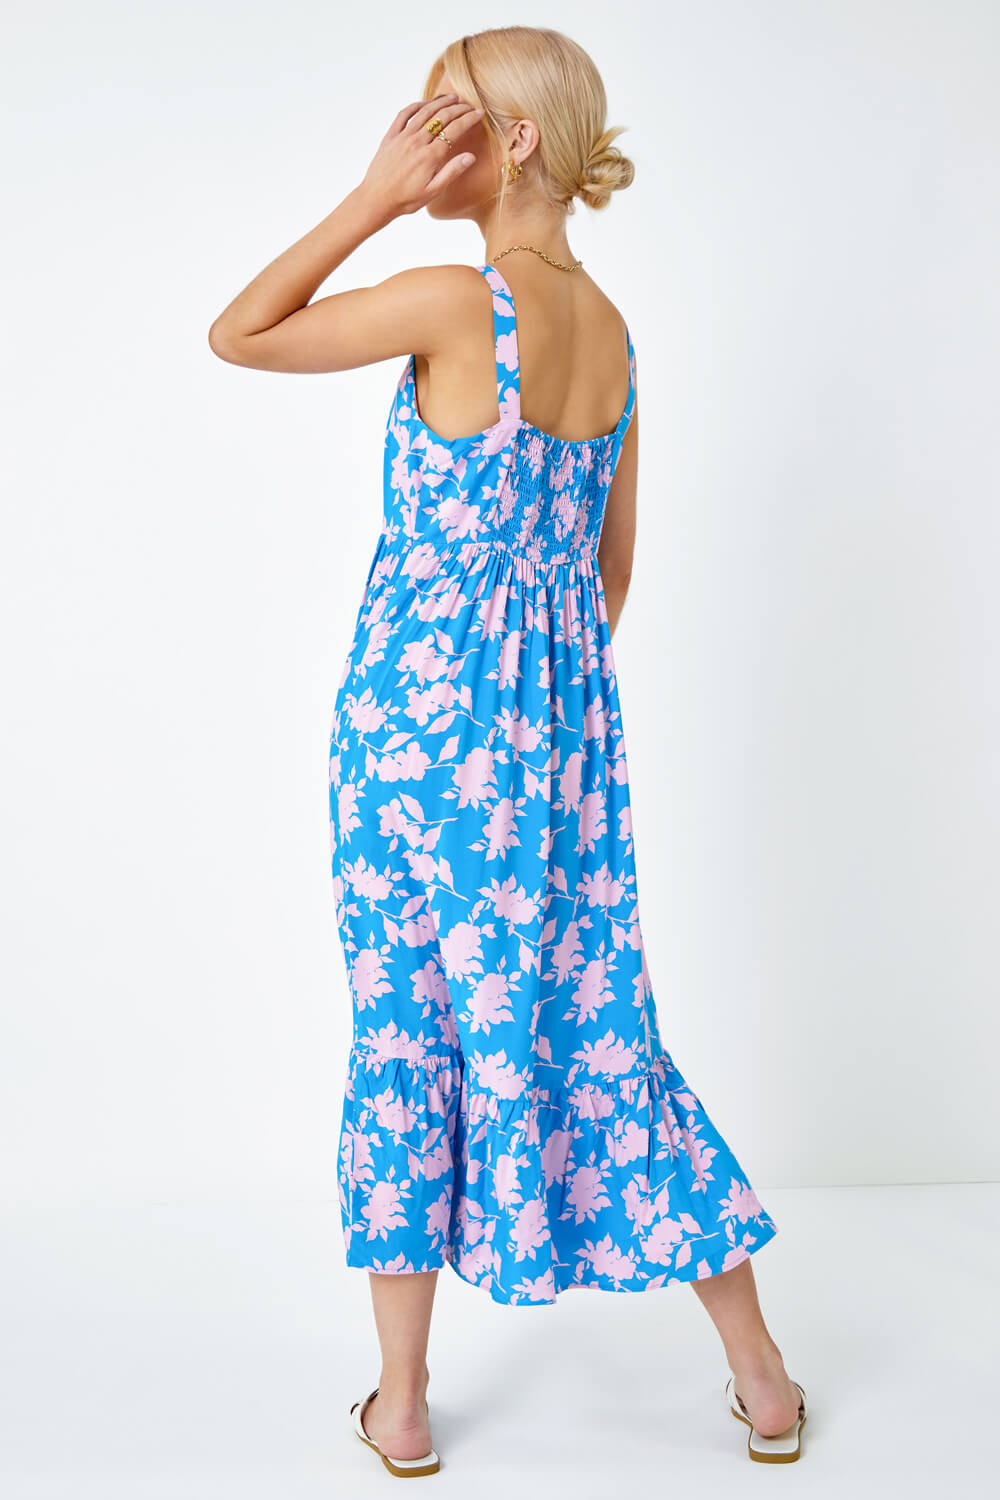 Sky Blue Sleeveless Floral Tiered Midi Dress, Image 3 of 5